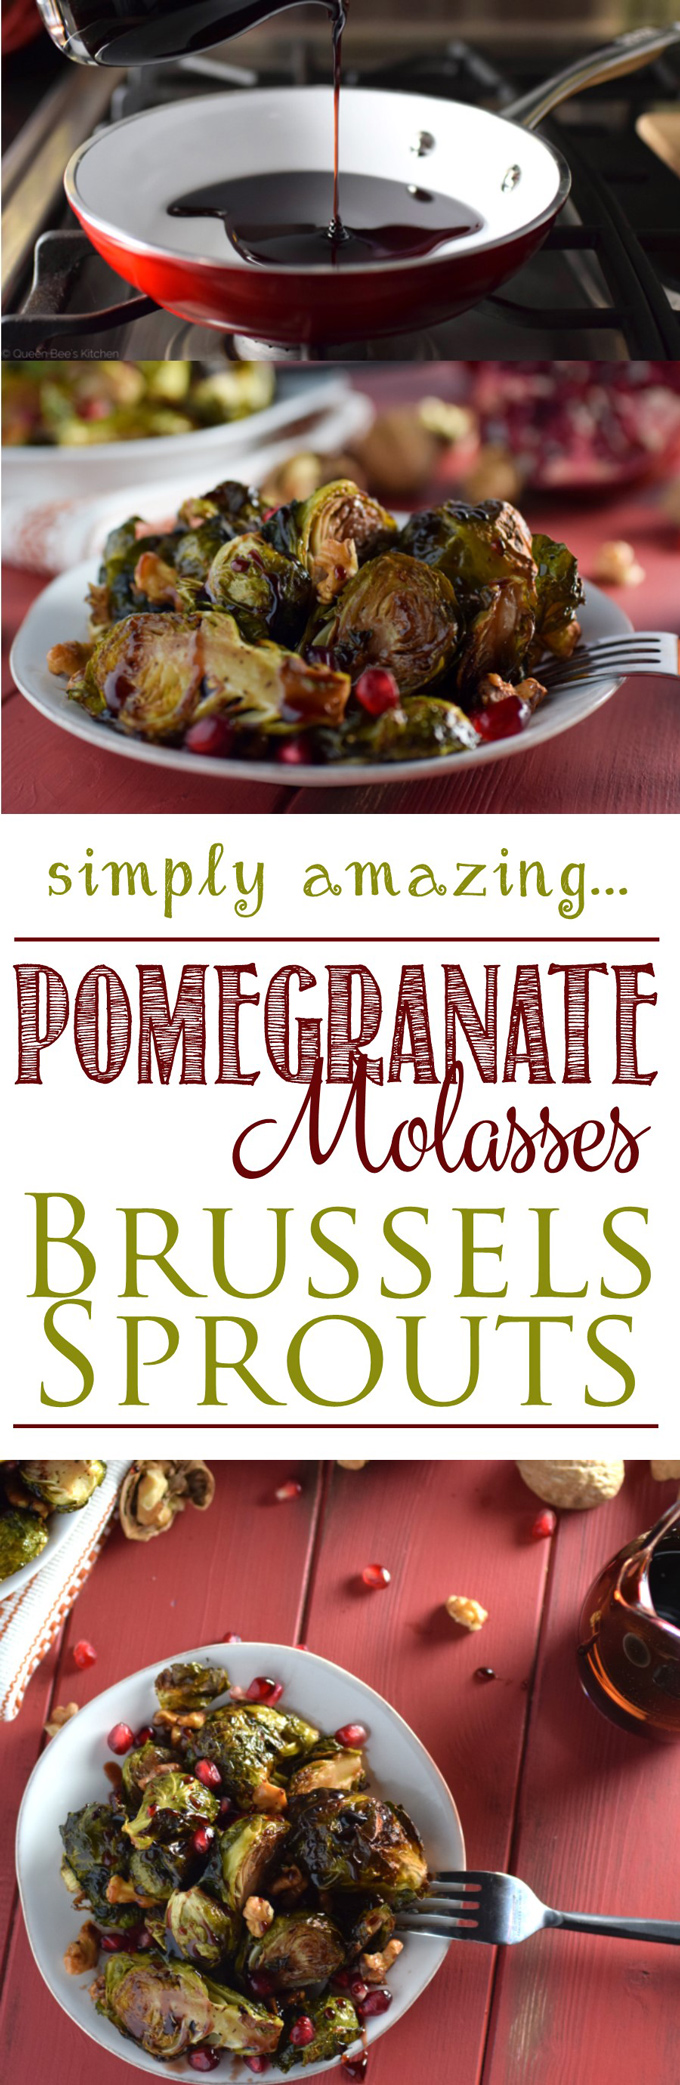 Pomegranate Molasses Brussels Sprouts